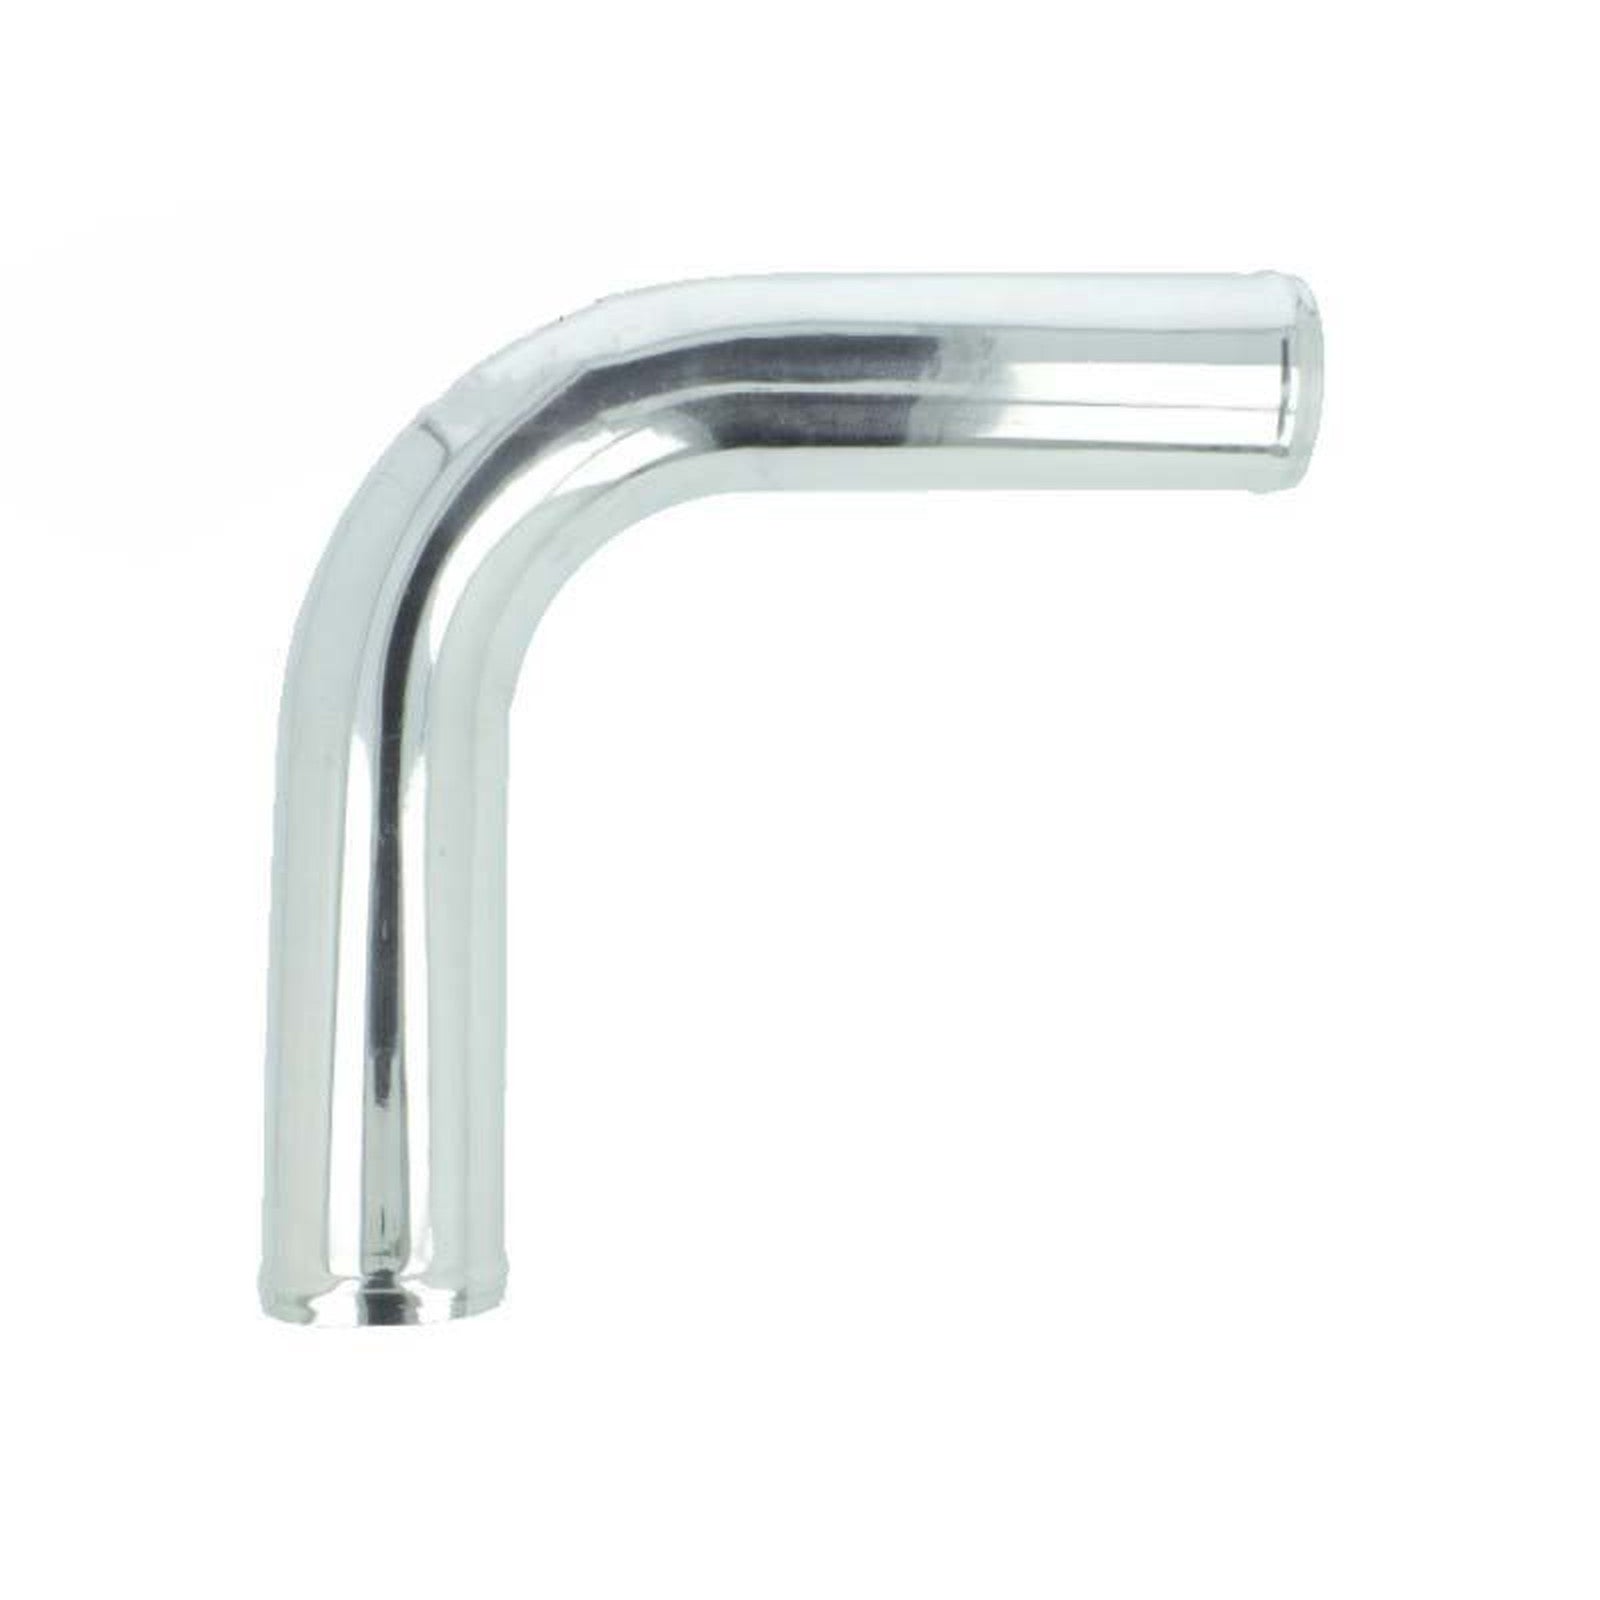 BOOST Products Aluminum Elbow 90 Degrees with 45mm (1-3/4") OD, Mandrel Bent, polish